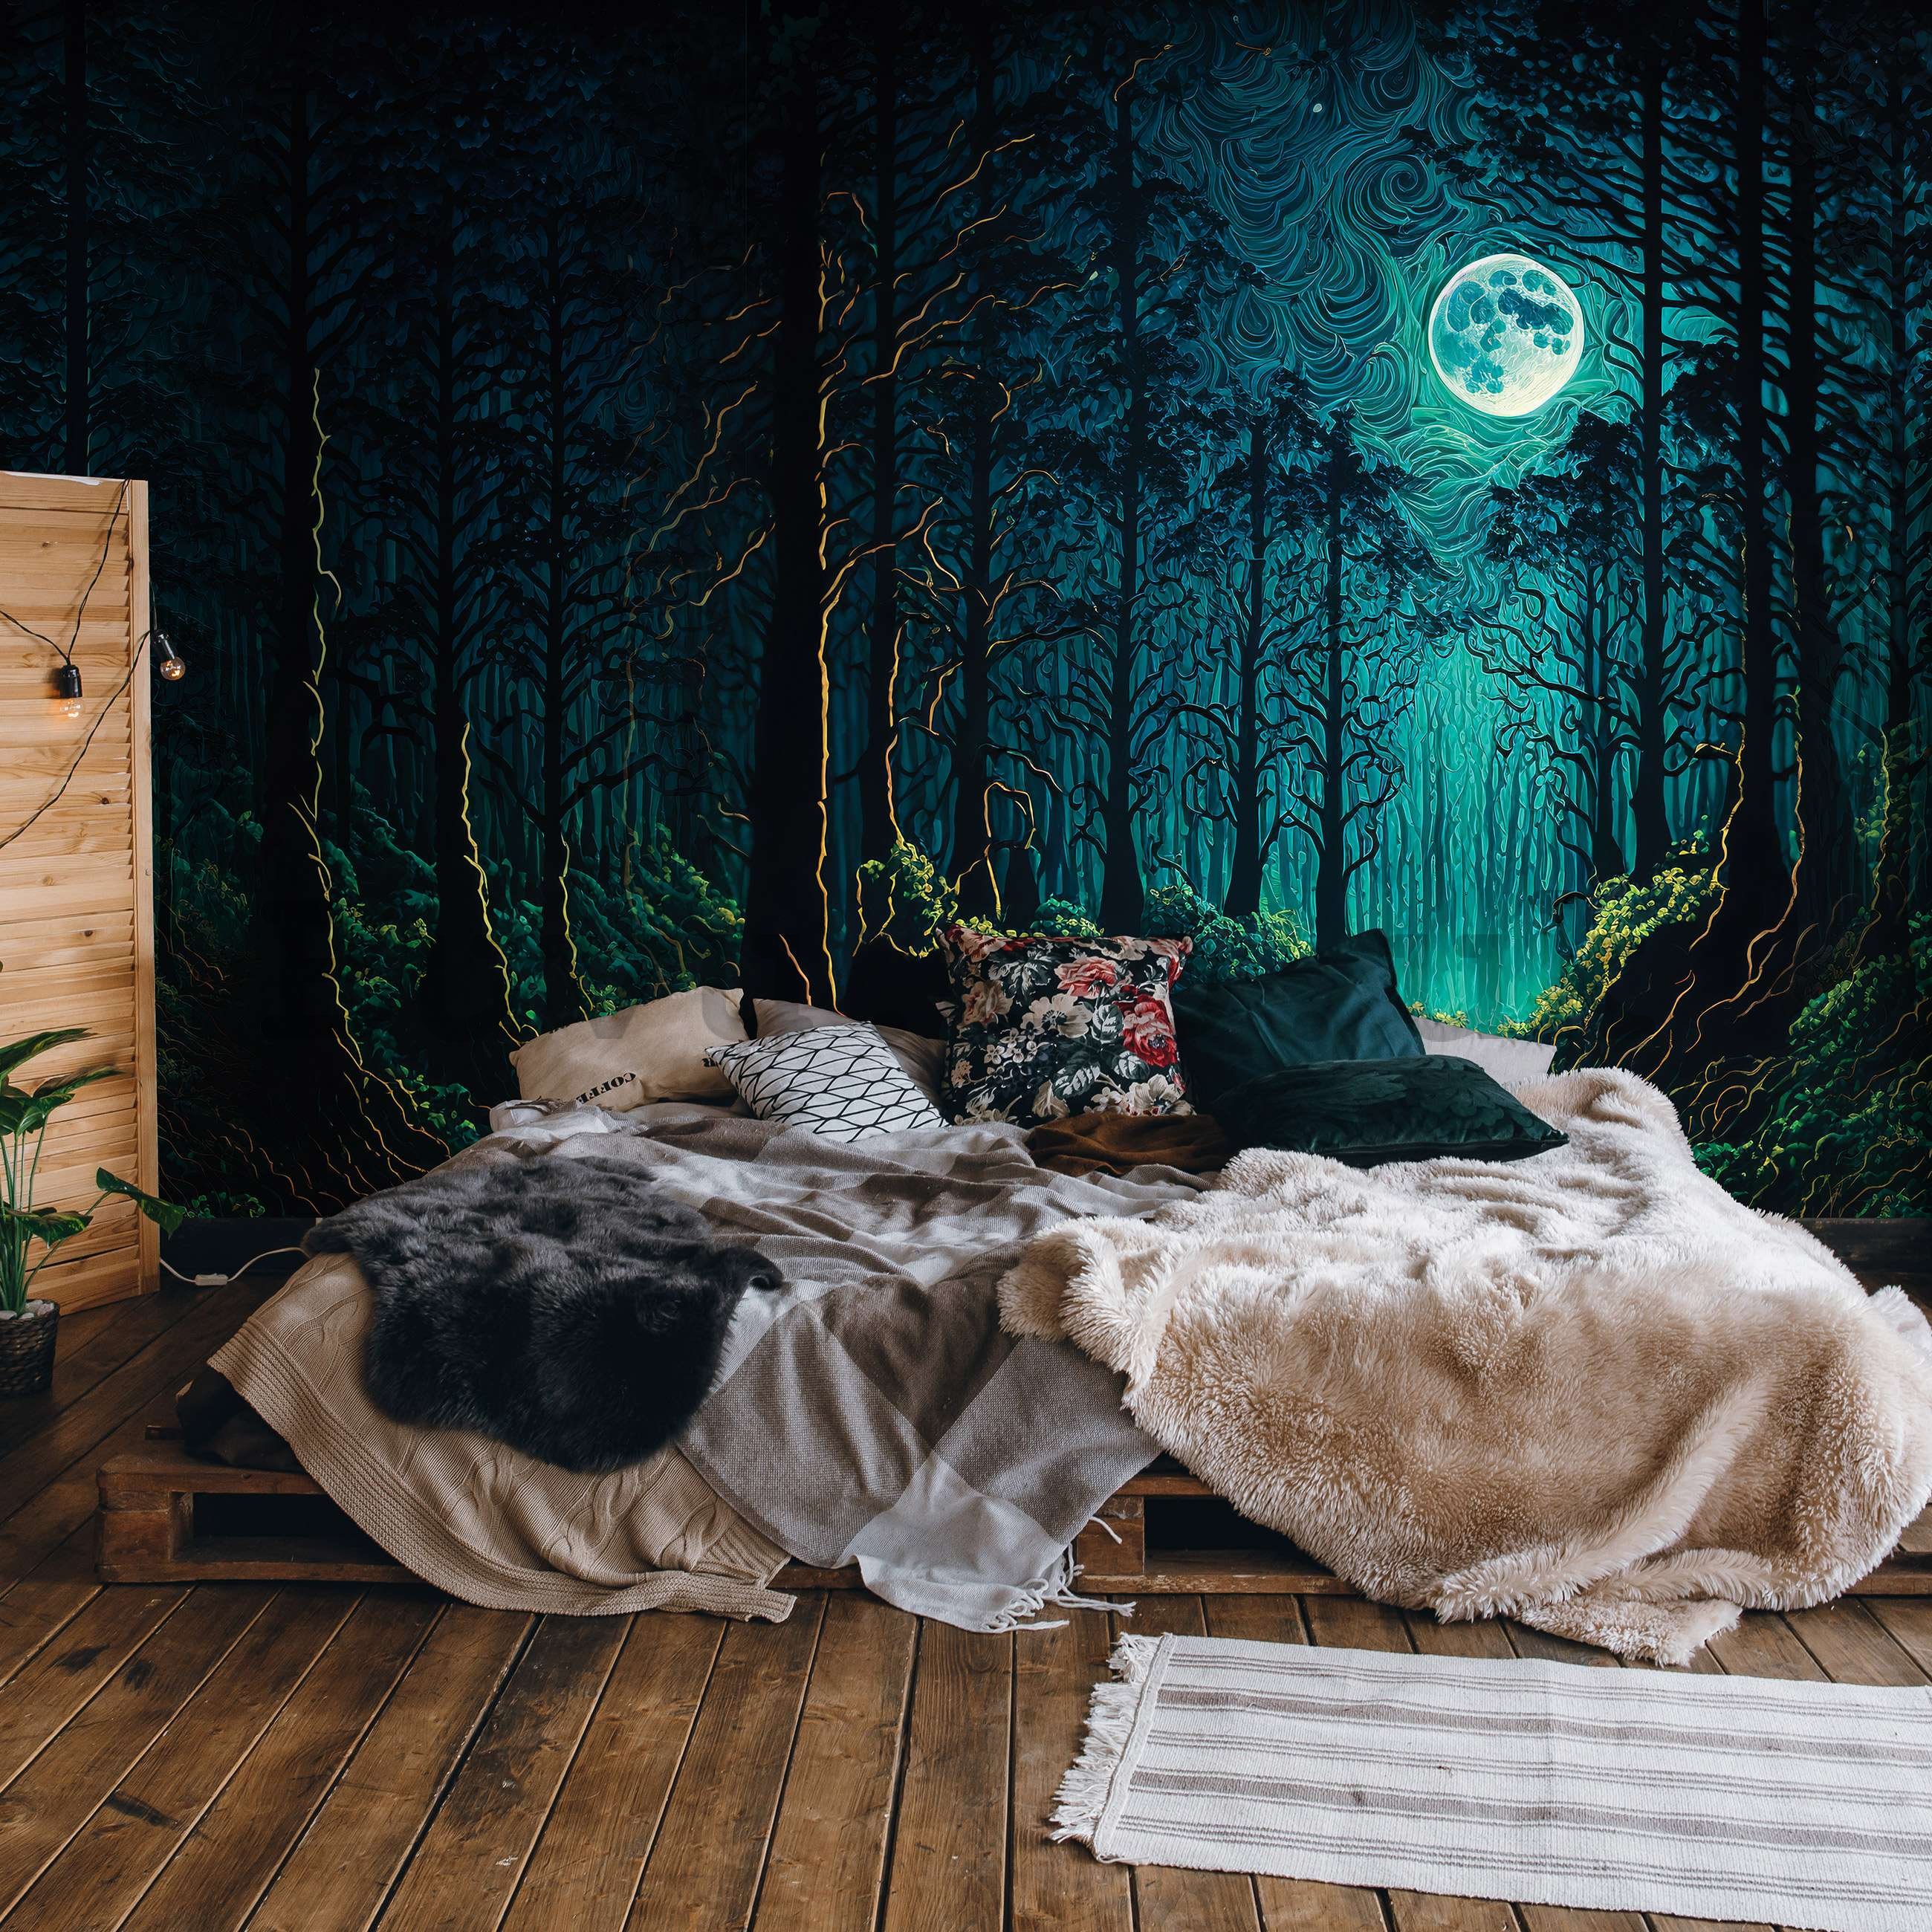 Wall mural vlies: Enchanted forest in the moonlight - 416x254 cm